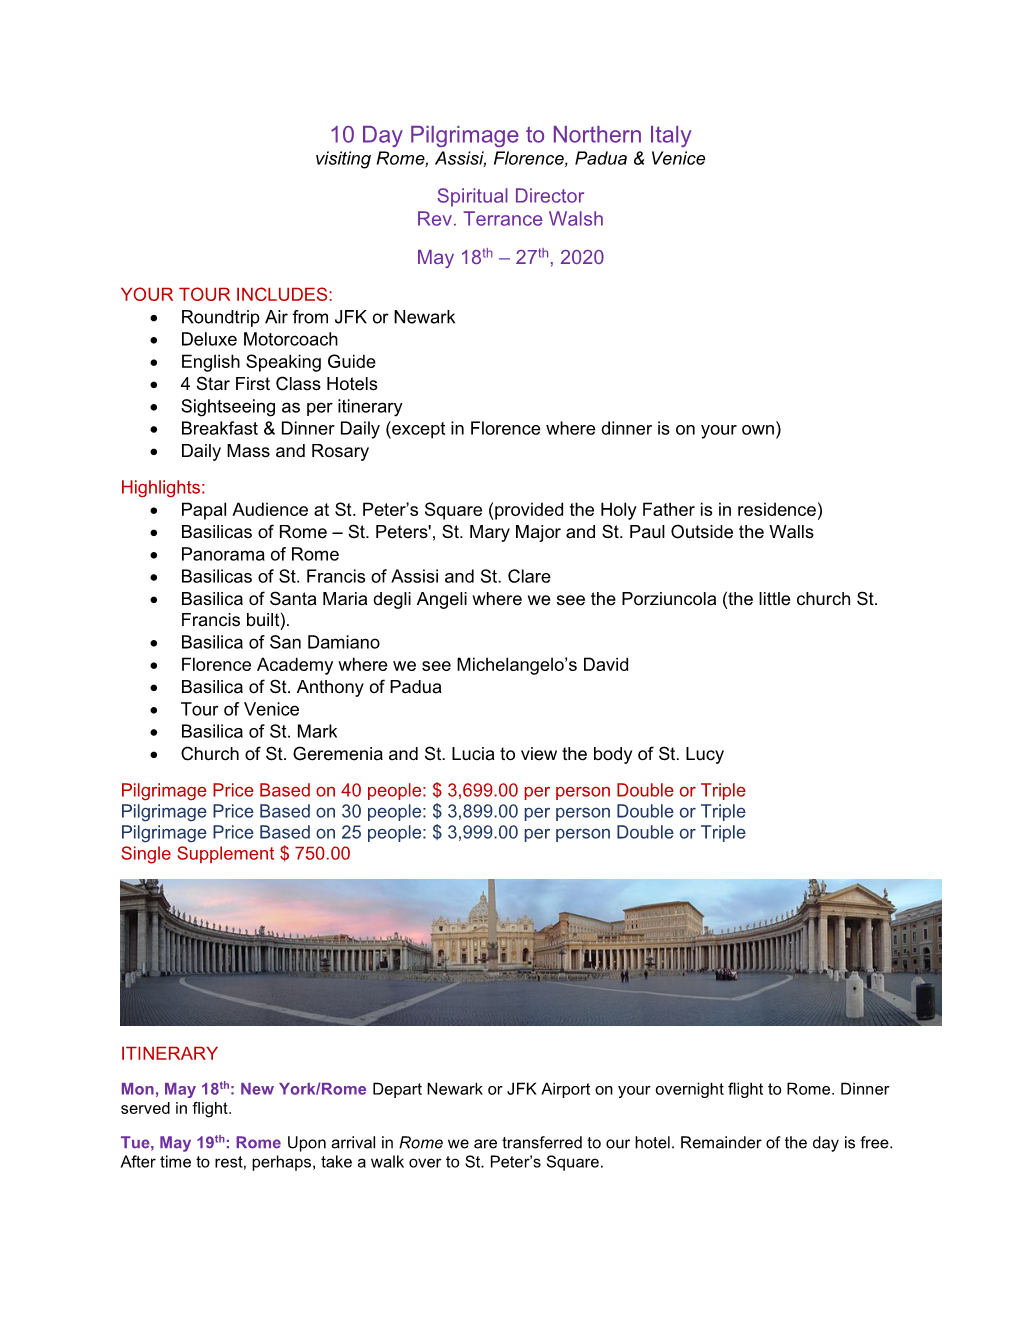 10 Day Pilgrimage to Northern Italy Visiting Rome, Assisi, Florence, Padua & Venice